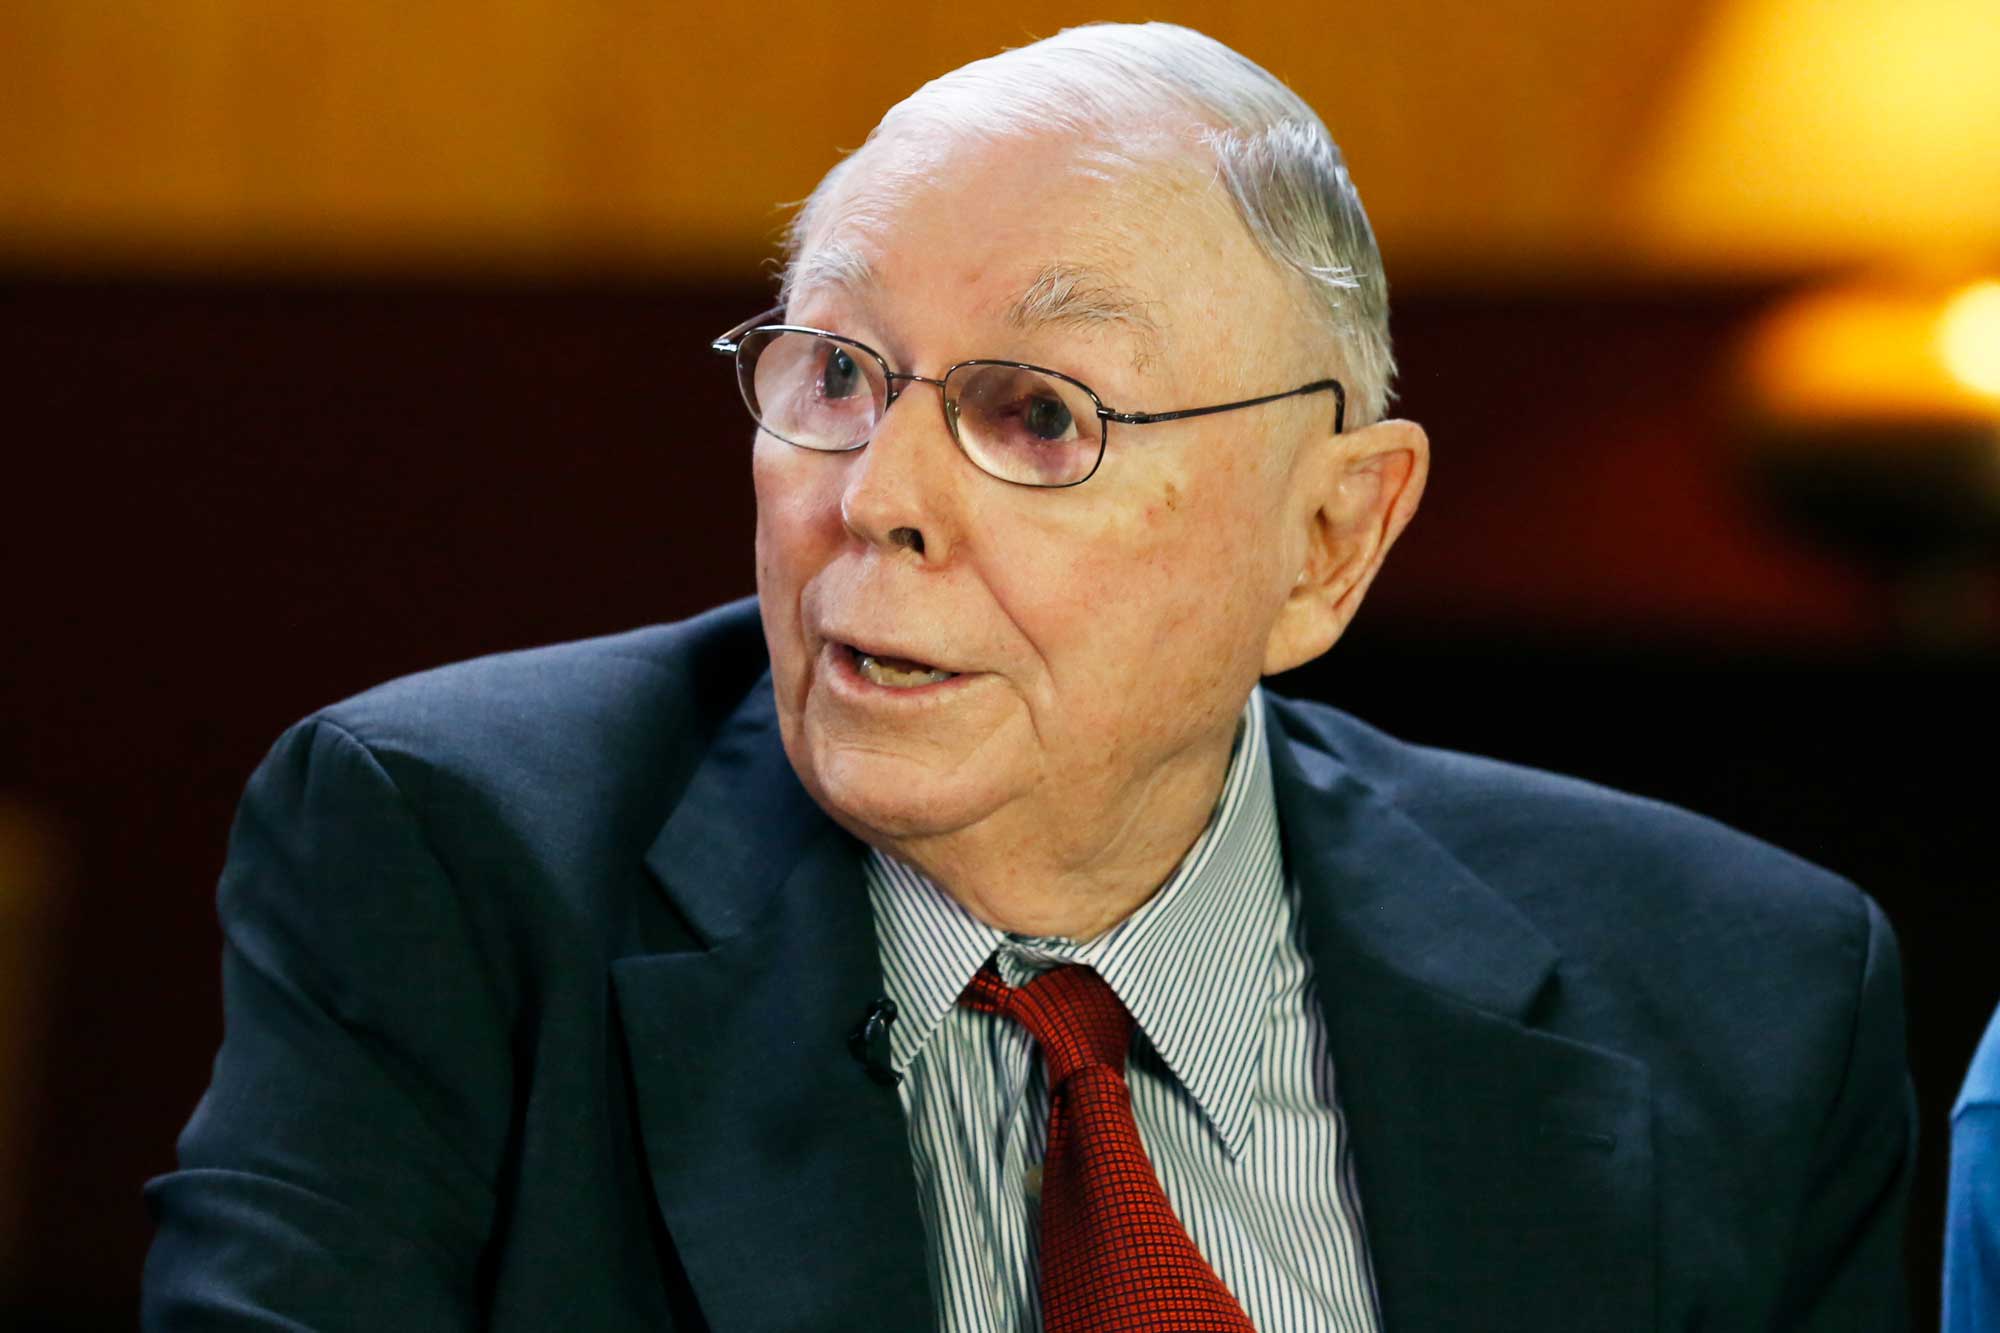 Charlie Munger will not take questions at Berkshire's annual meeting